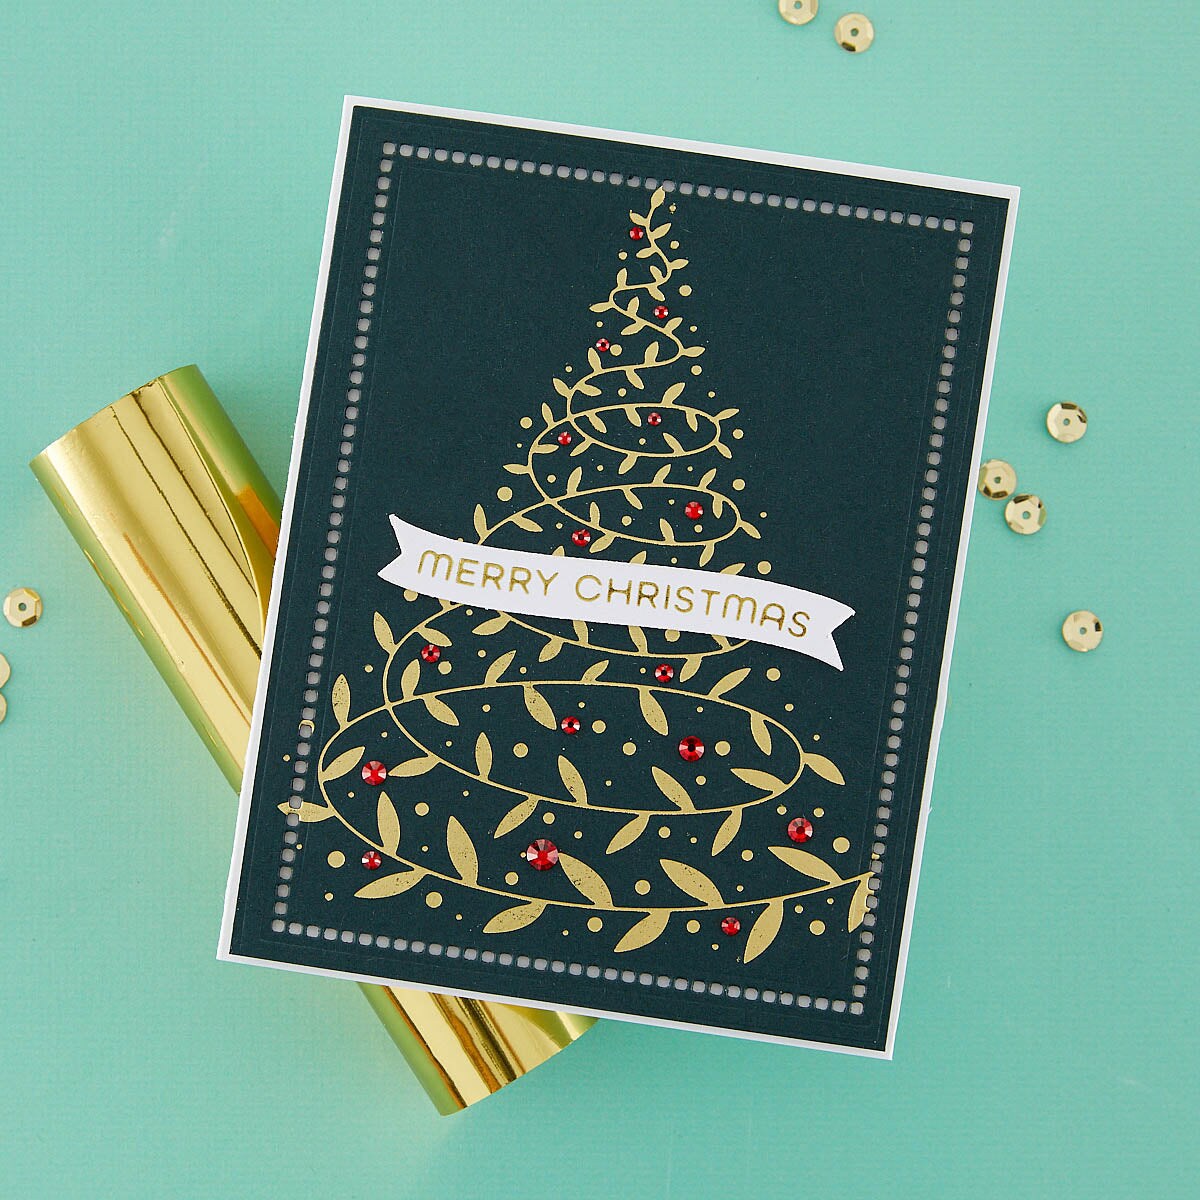 Spellbinders Swirling Foliage Tree Hot Foil Plate from the Glimmer for the Holidays Collection